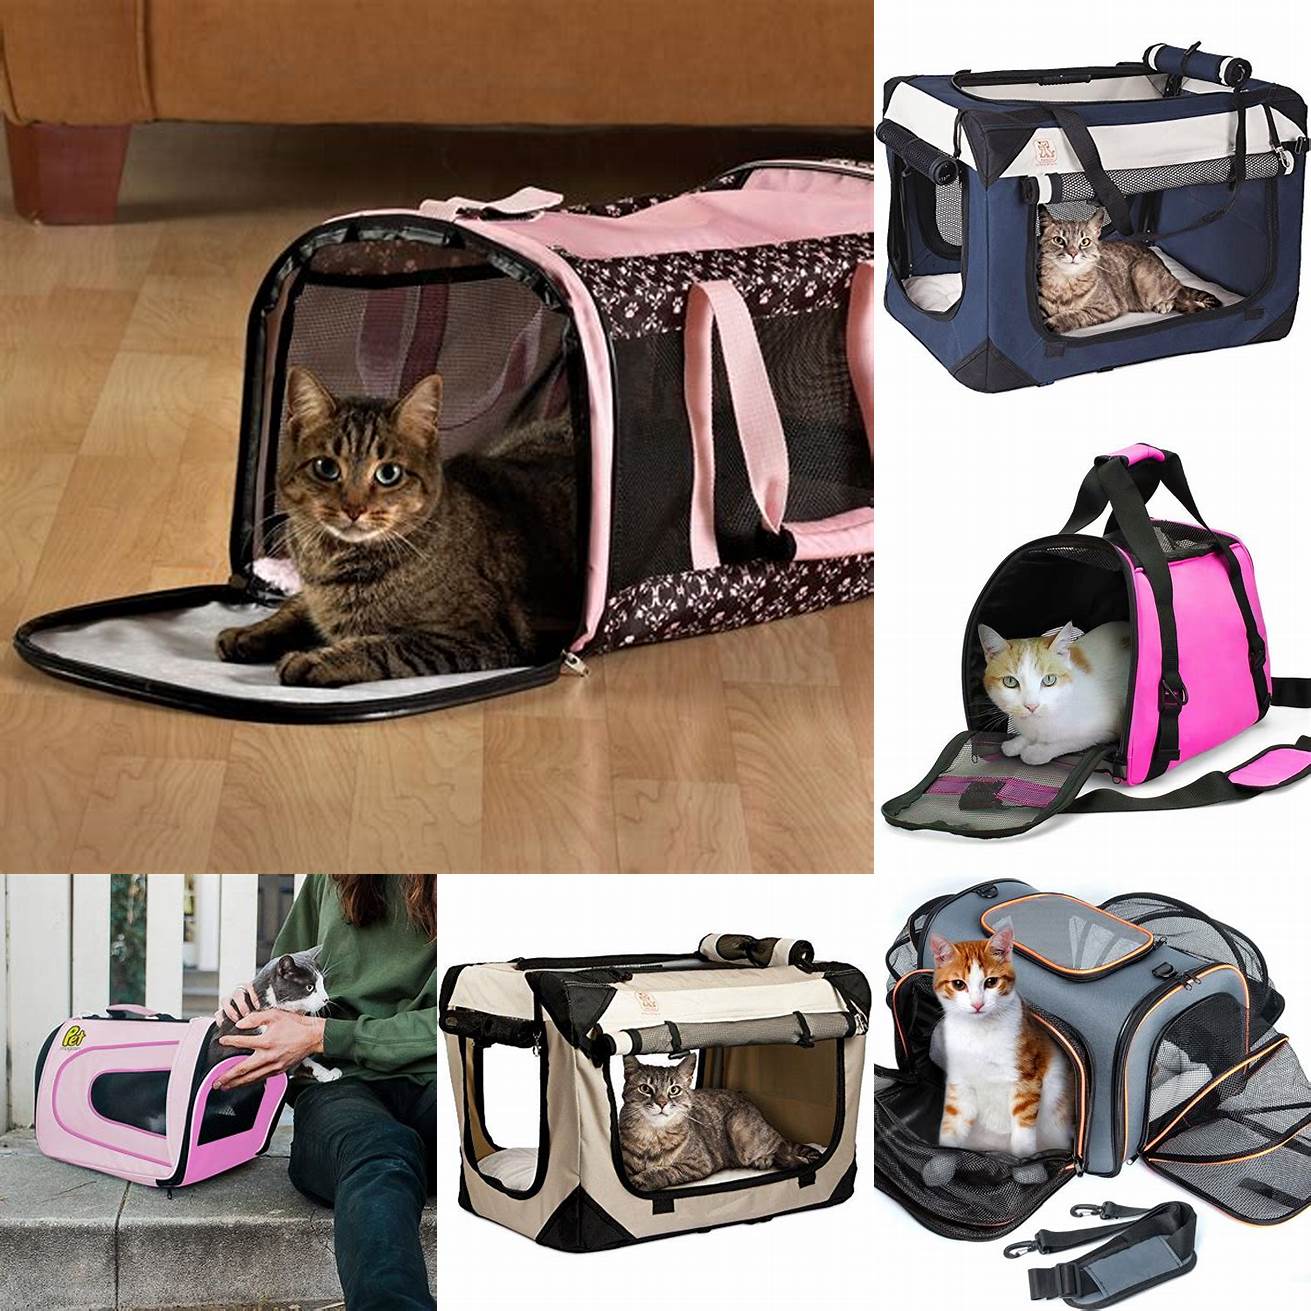 Soft-sided cat carrier